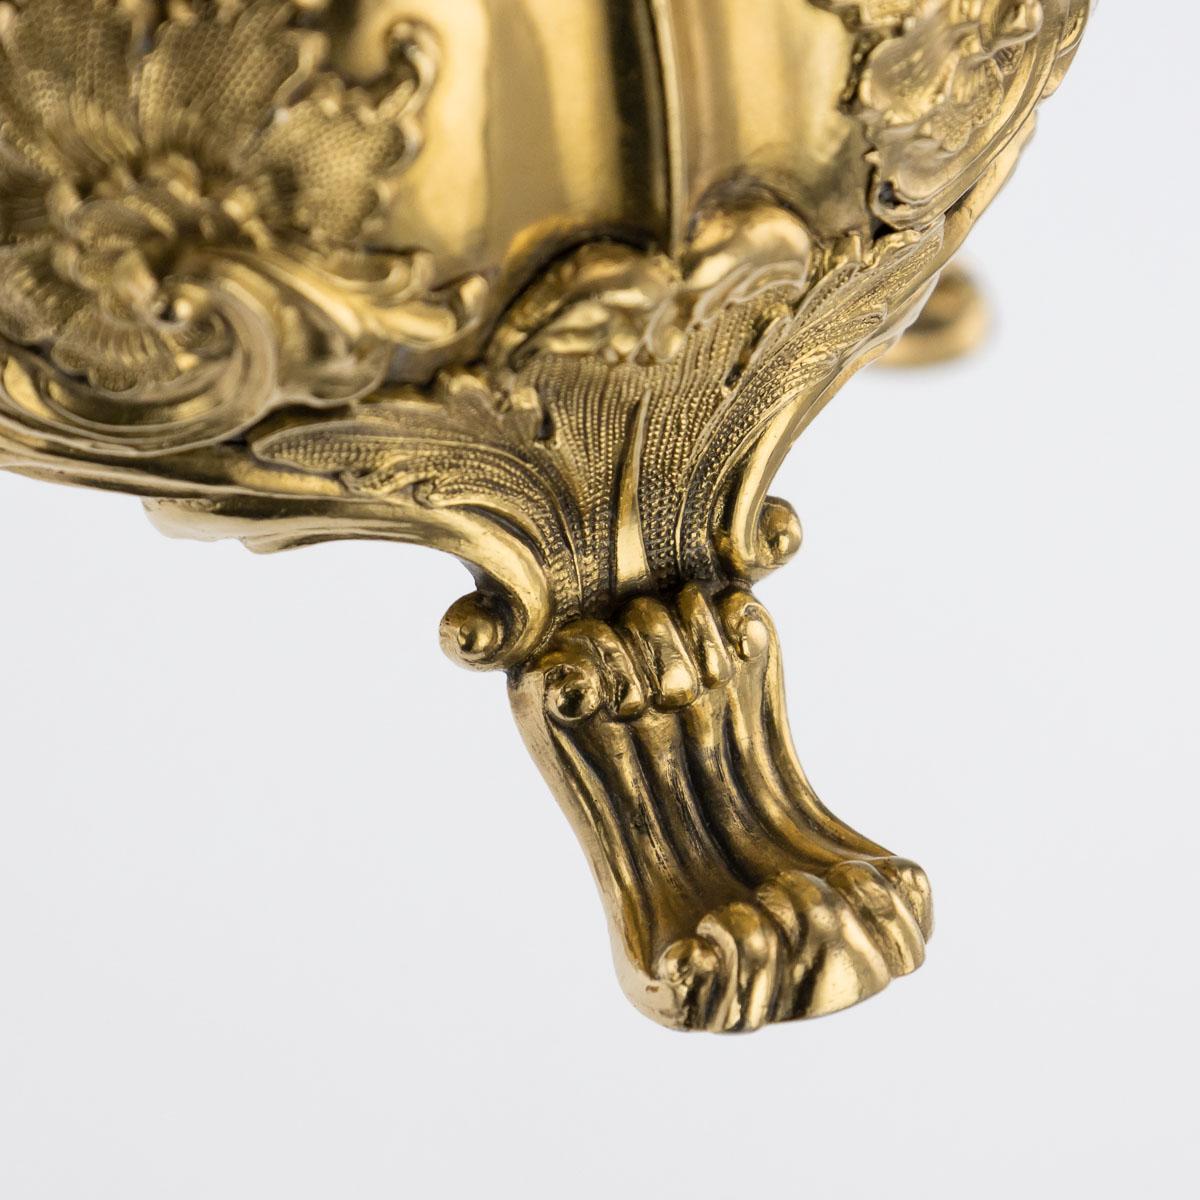 19th Century Russian Solid Silver-Gilt Cup and Cover, St-Petersburg, circa 1842 10